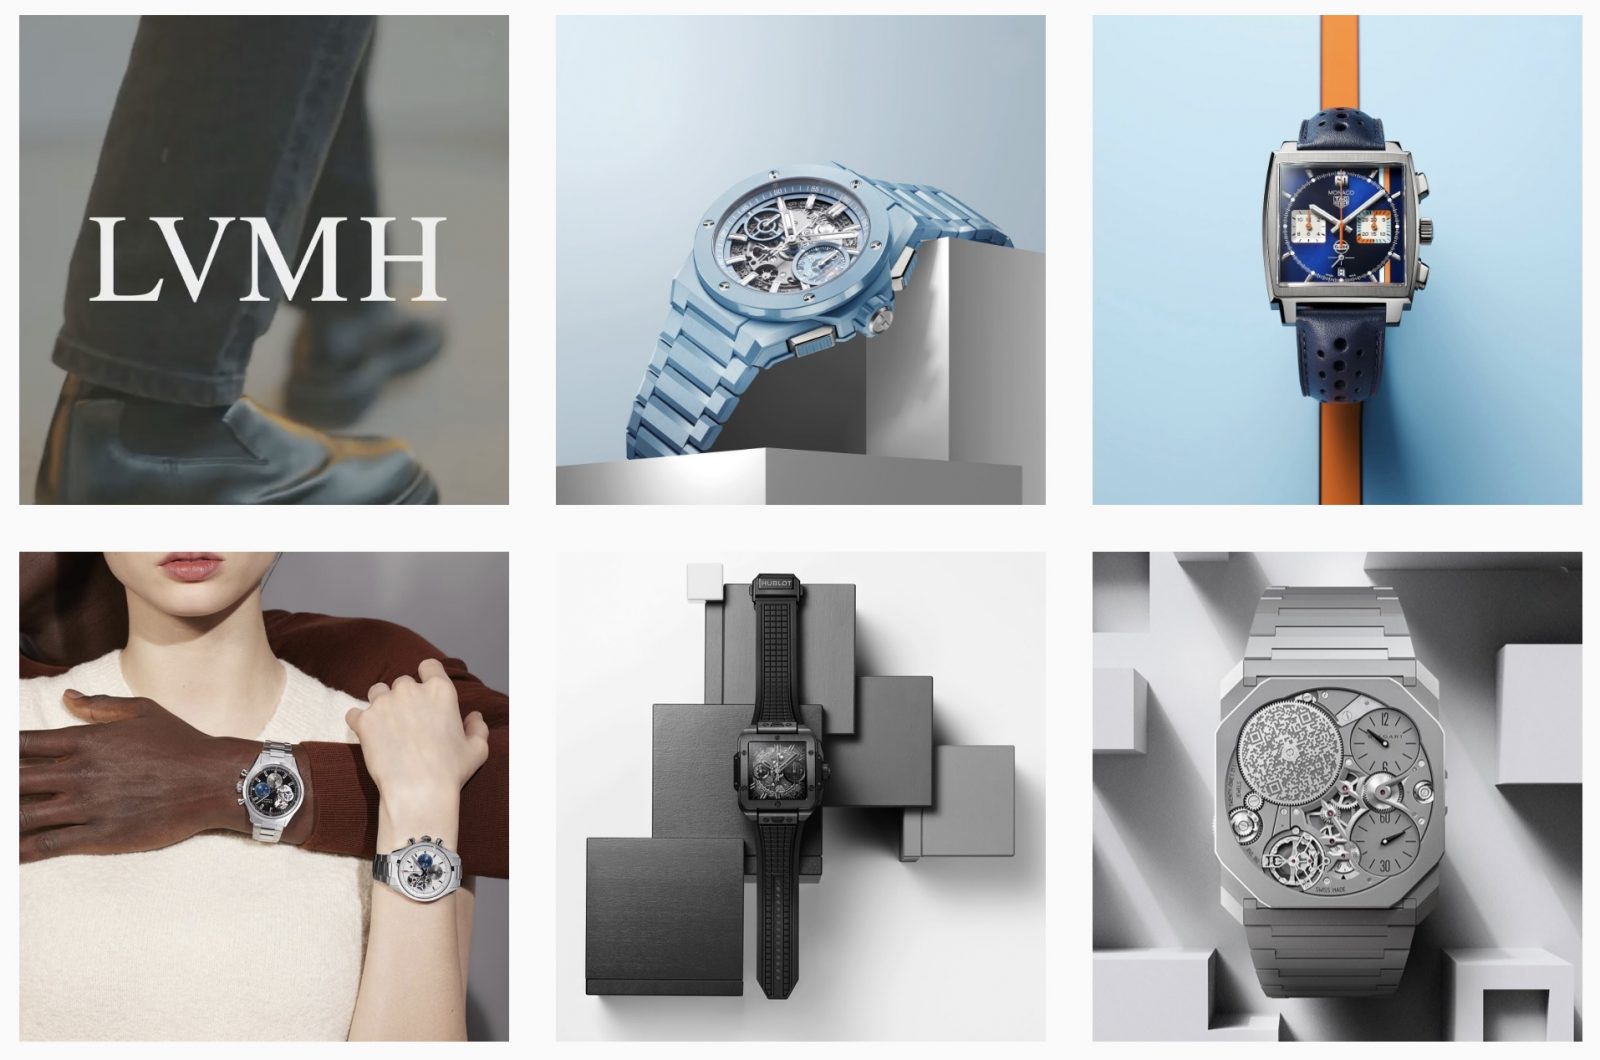 LVMH jewelry and watches